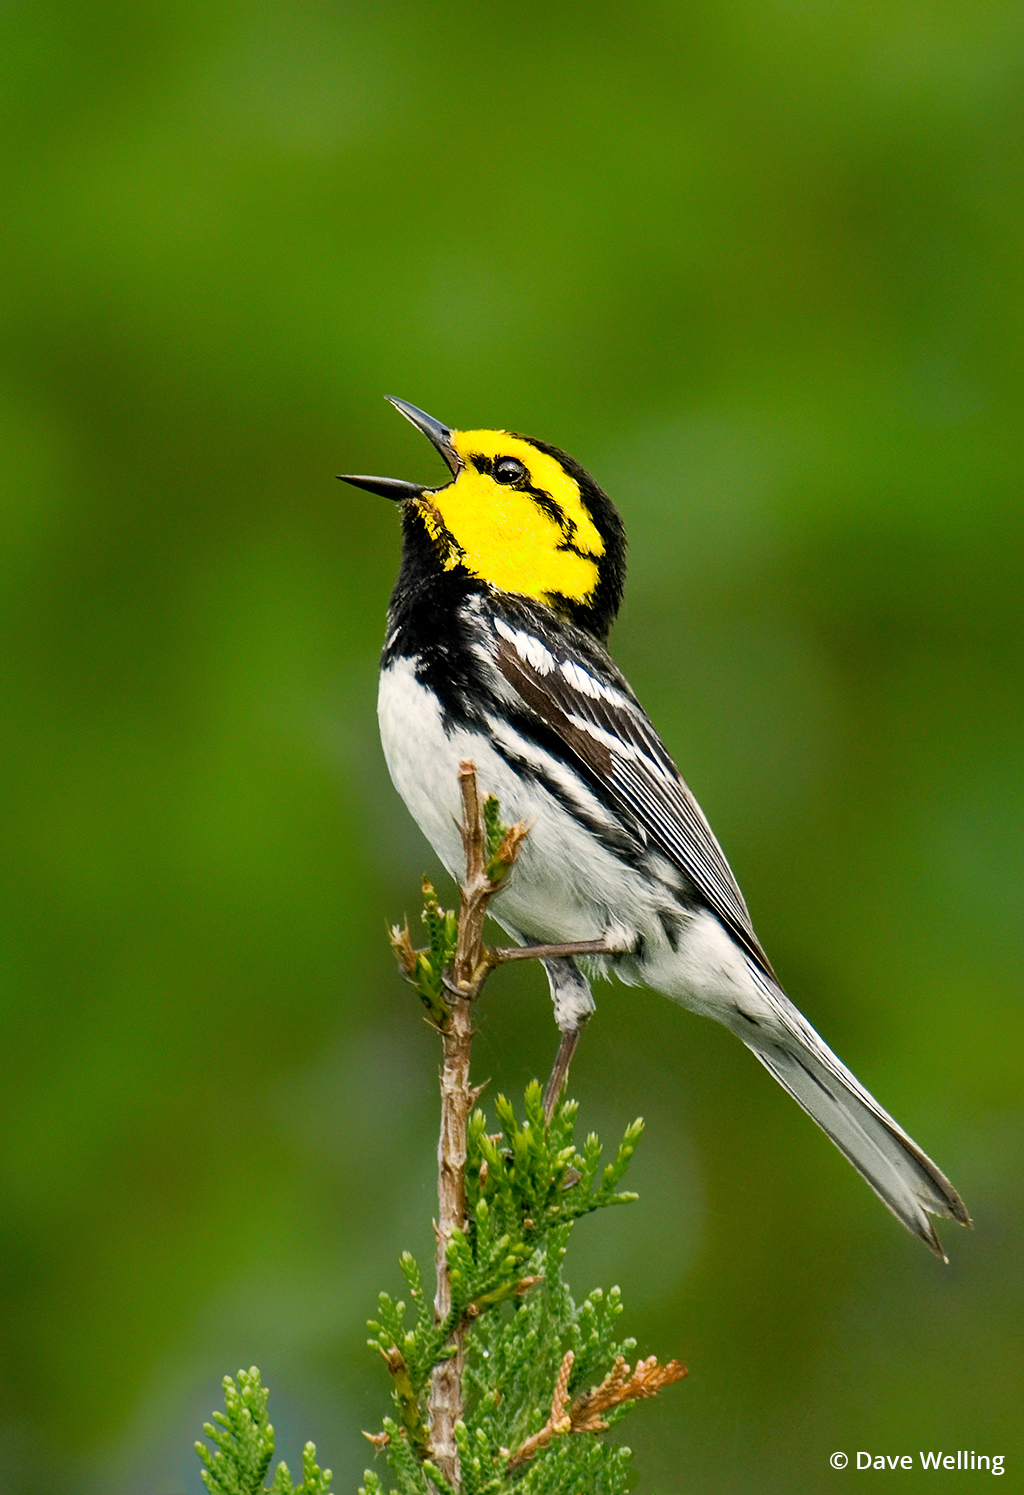 Image of a golden-cheeked warbler.